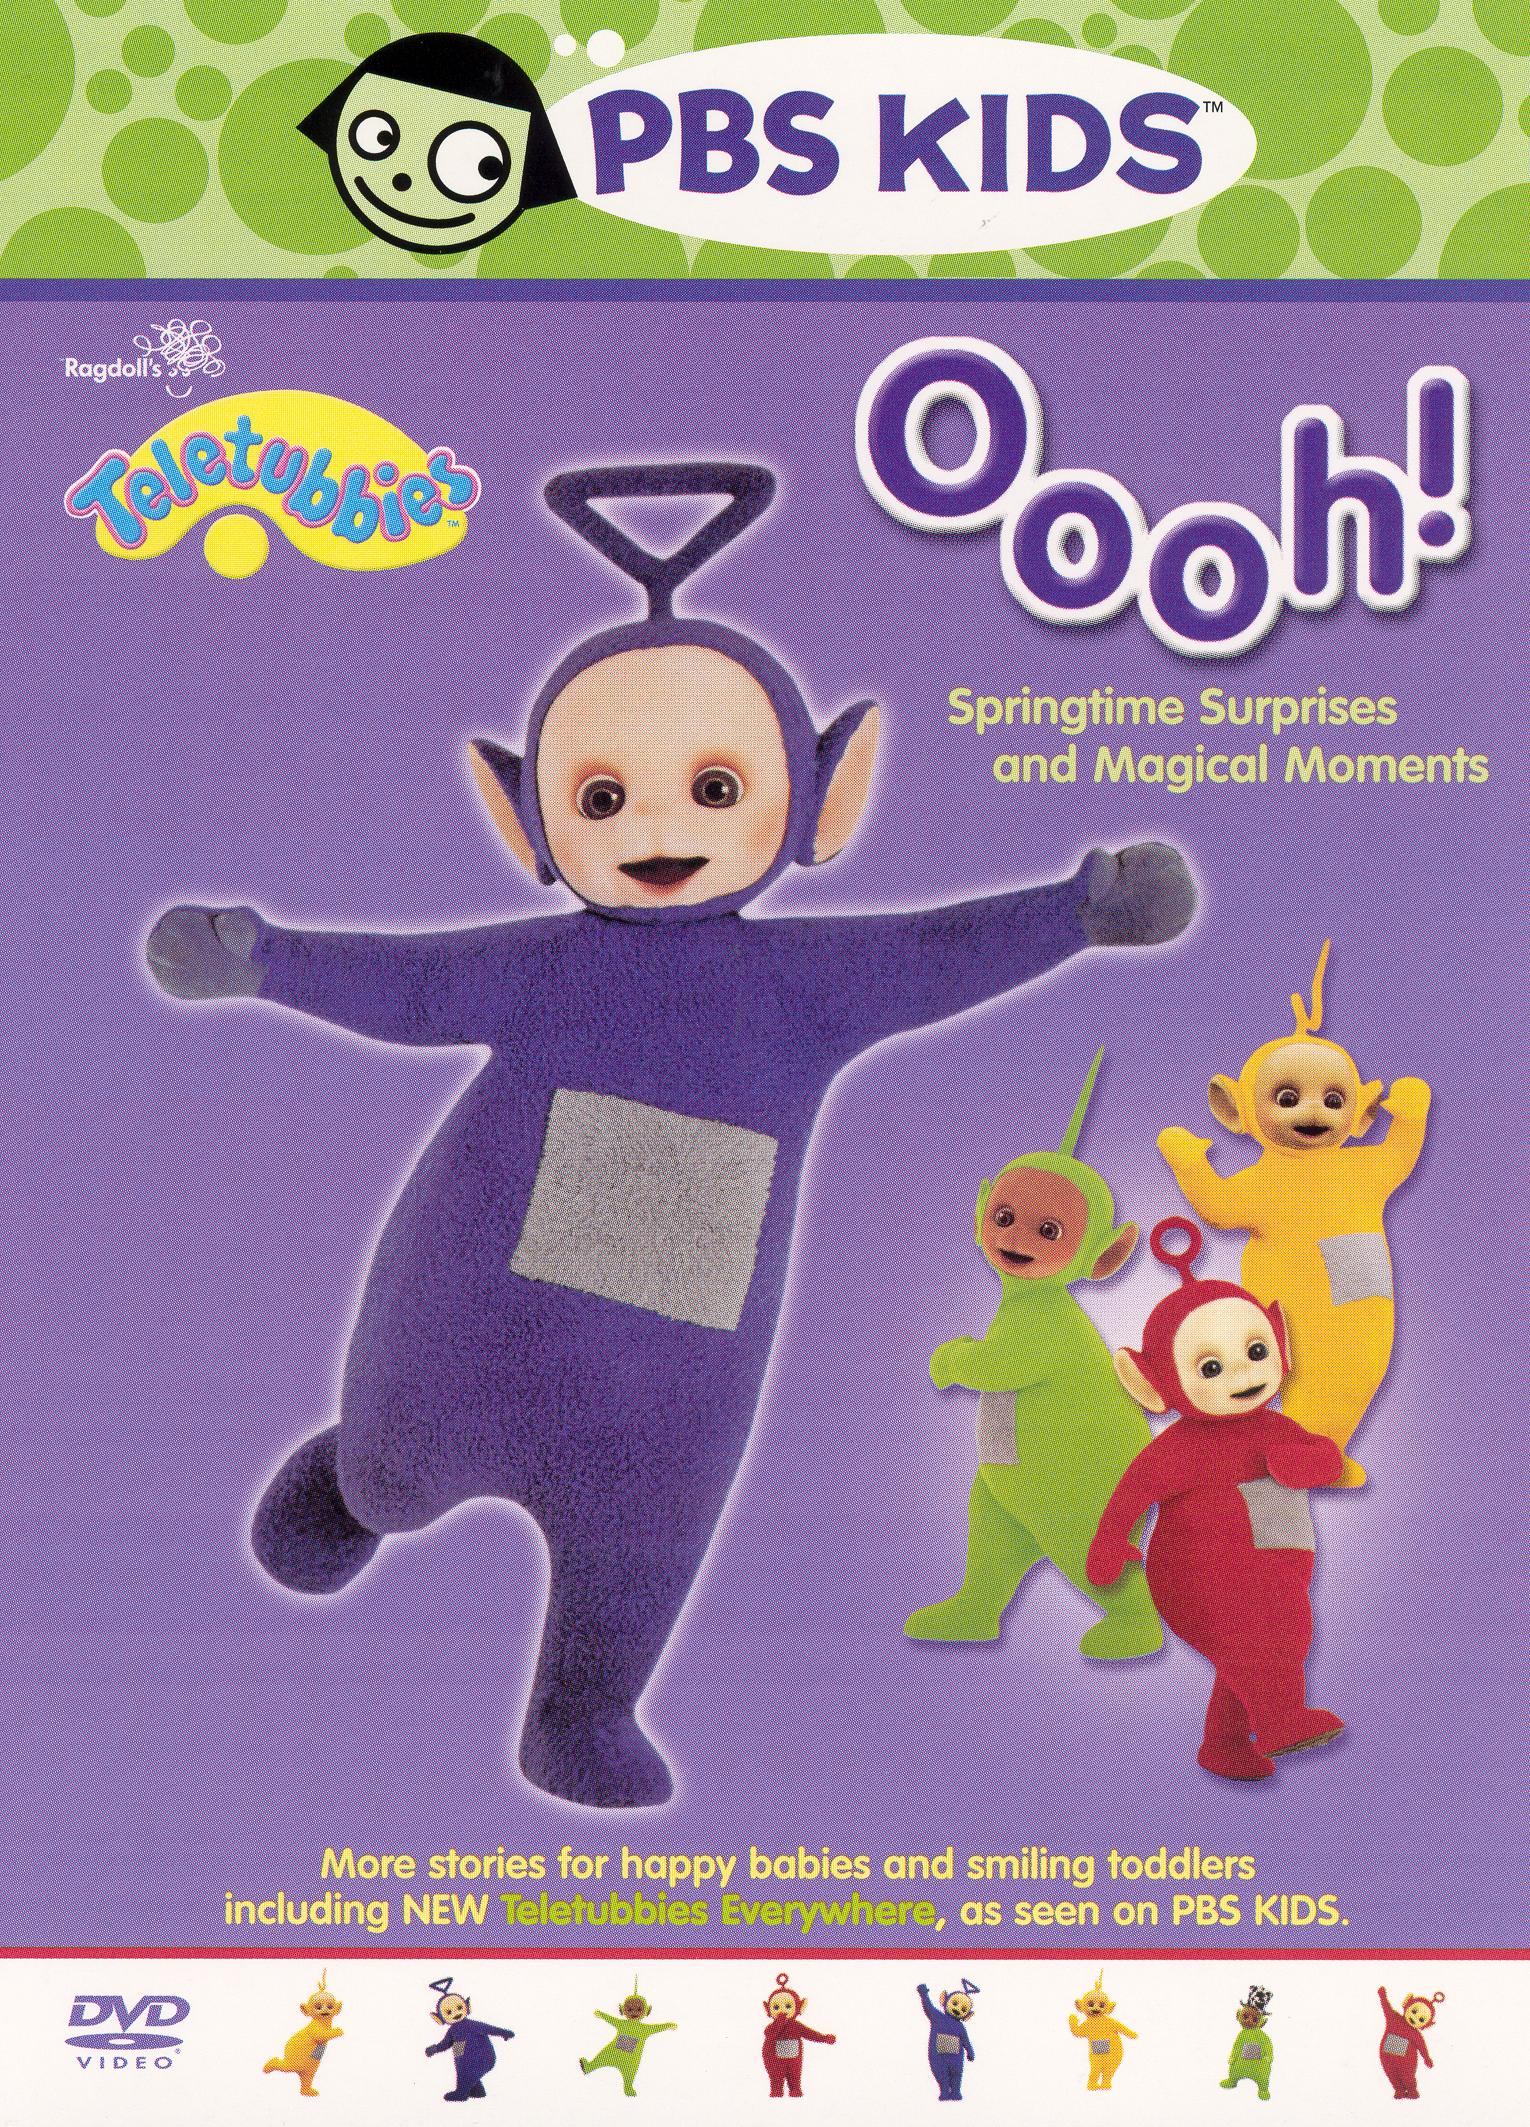 Teletubbies: Oooh! - Springtime Surprises and Magical Moments (2003 ...